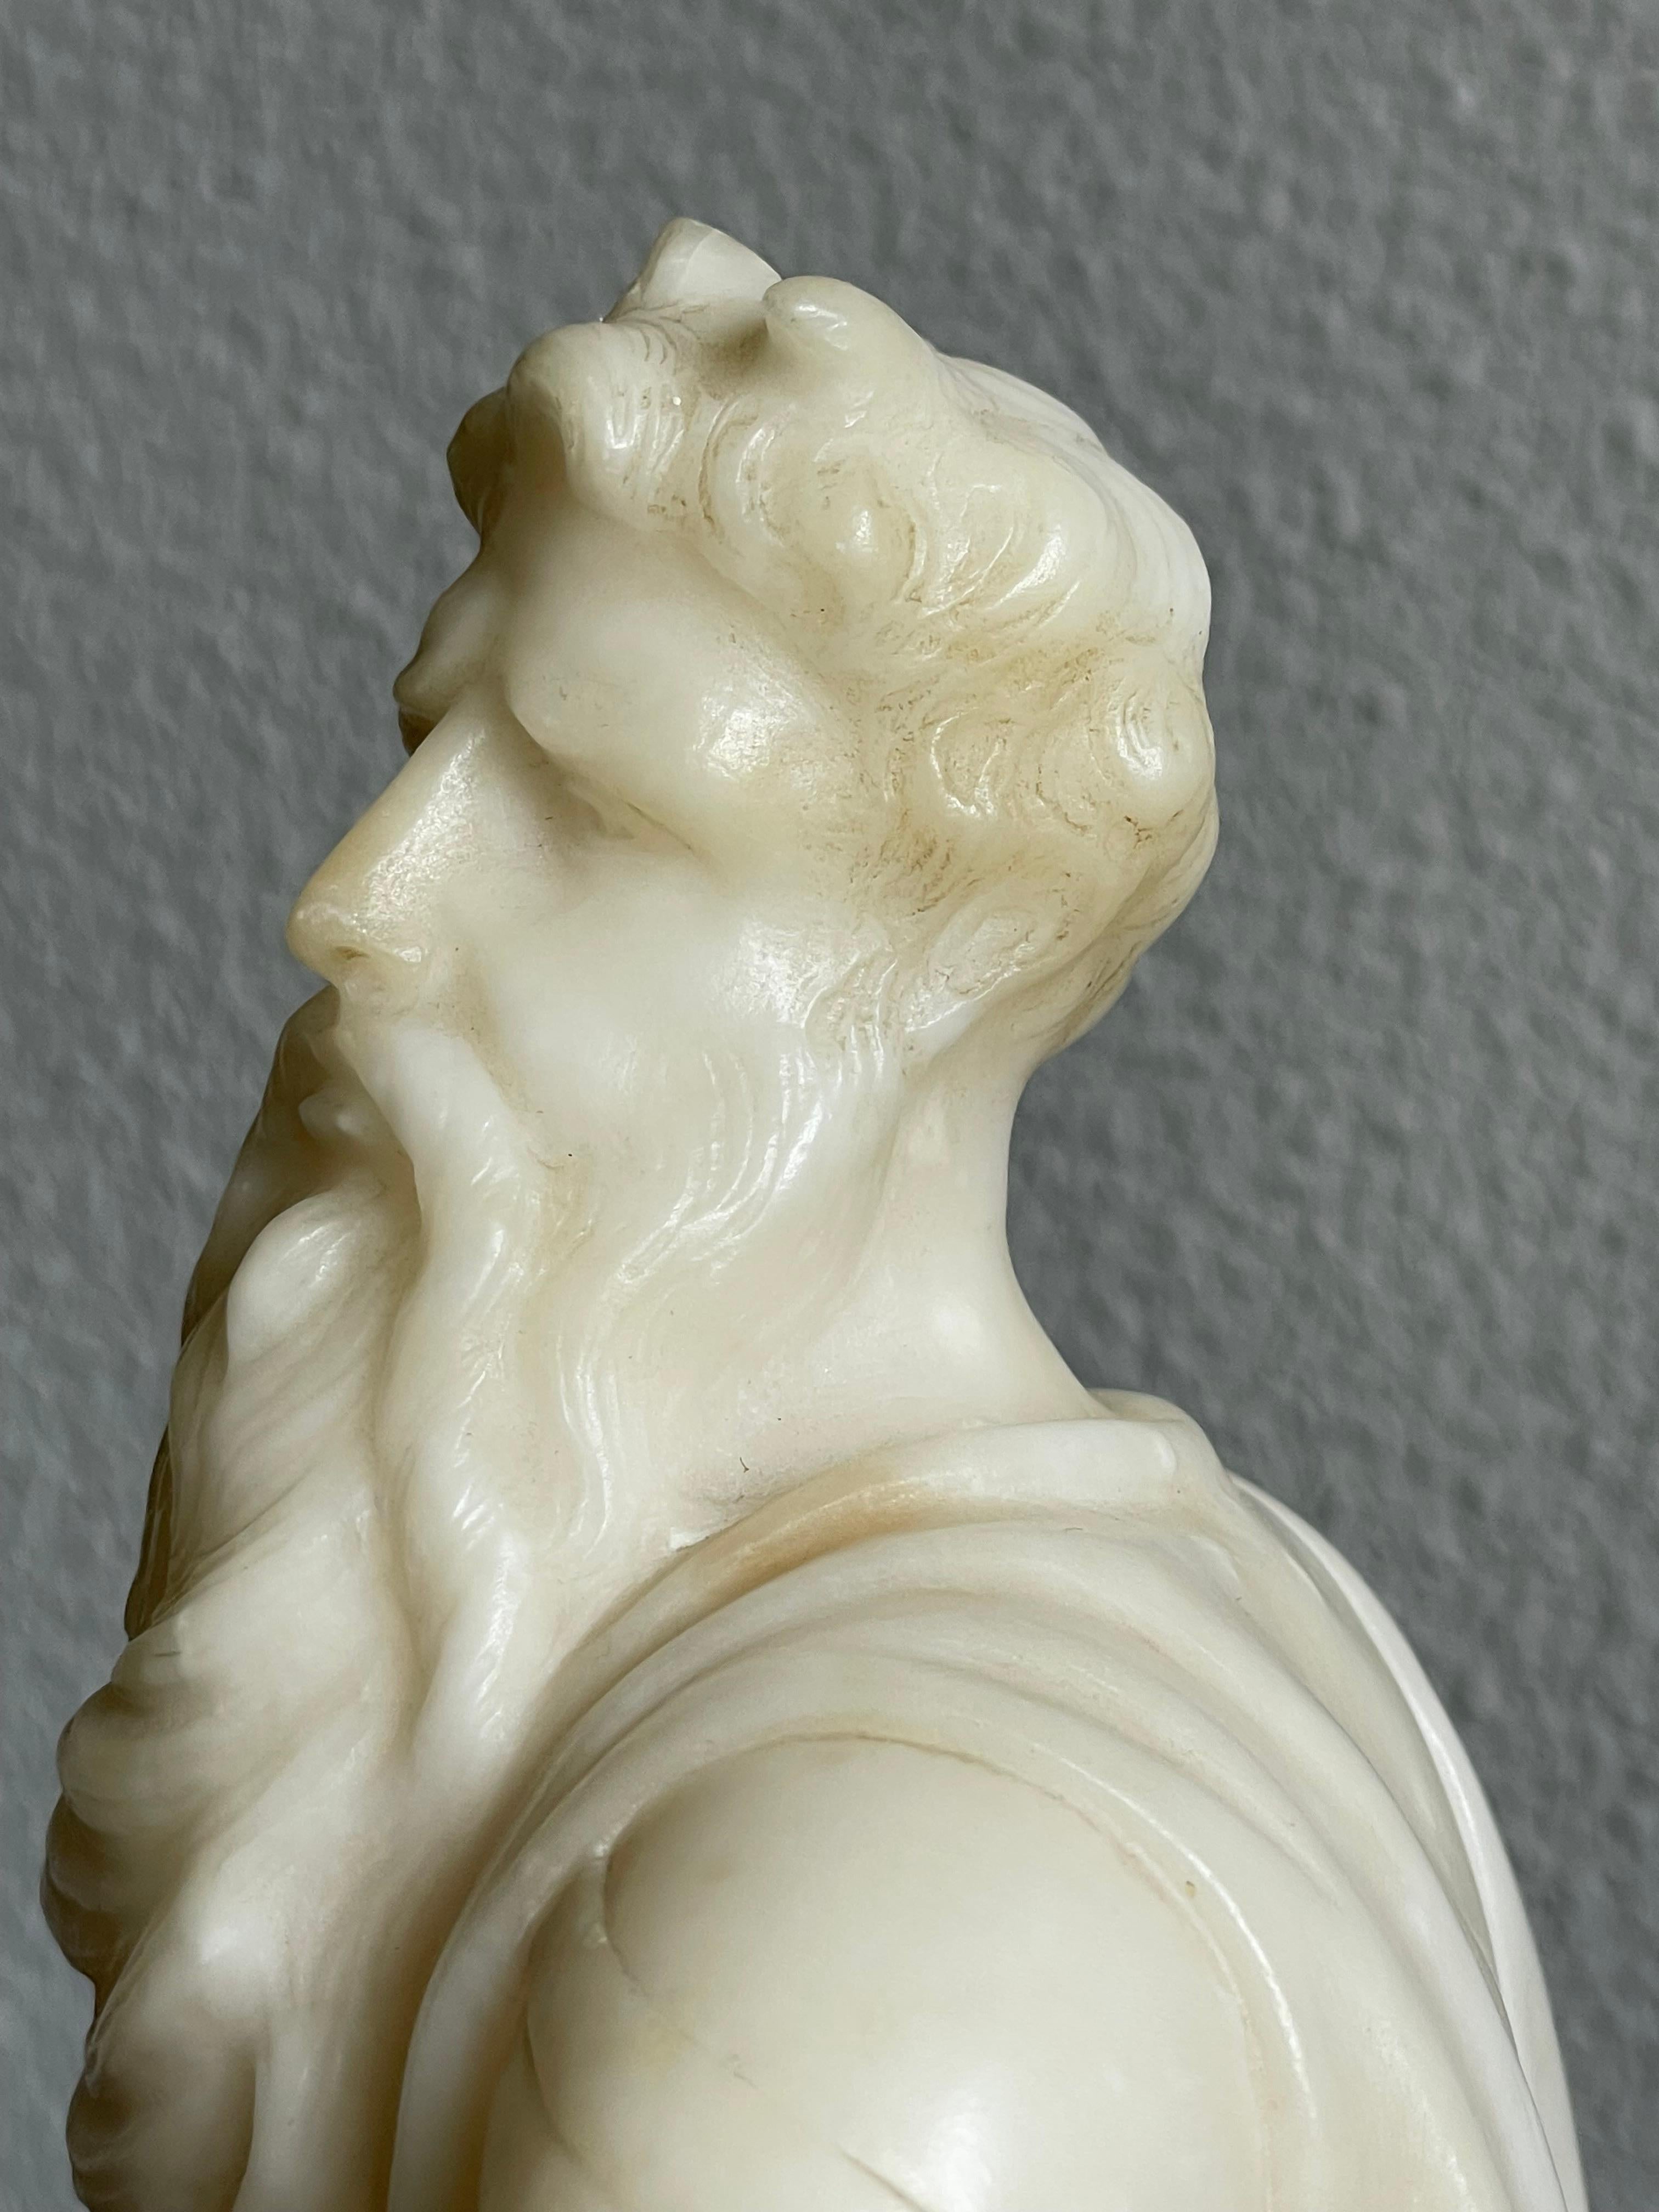 Renaissance Revival Stunning Hand Carved Alabaster Sculpture of Moses Grand Tour Italian Antique For Sale